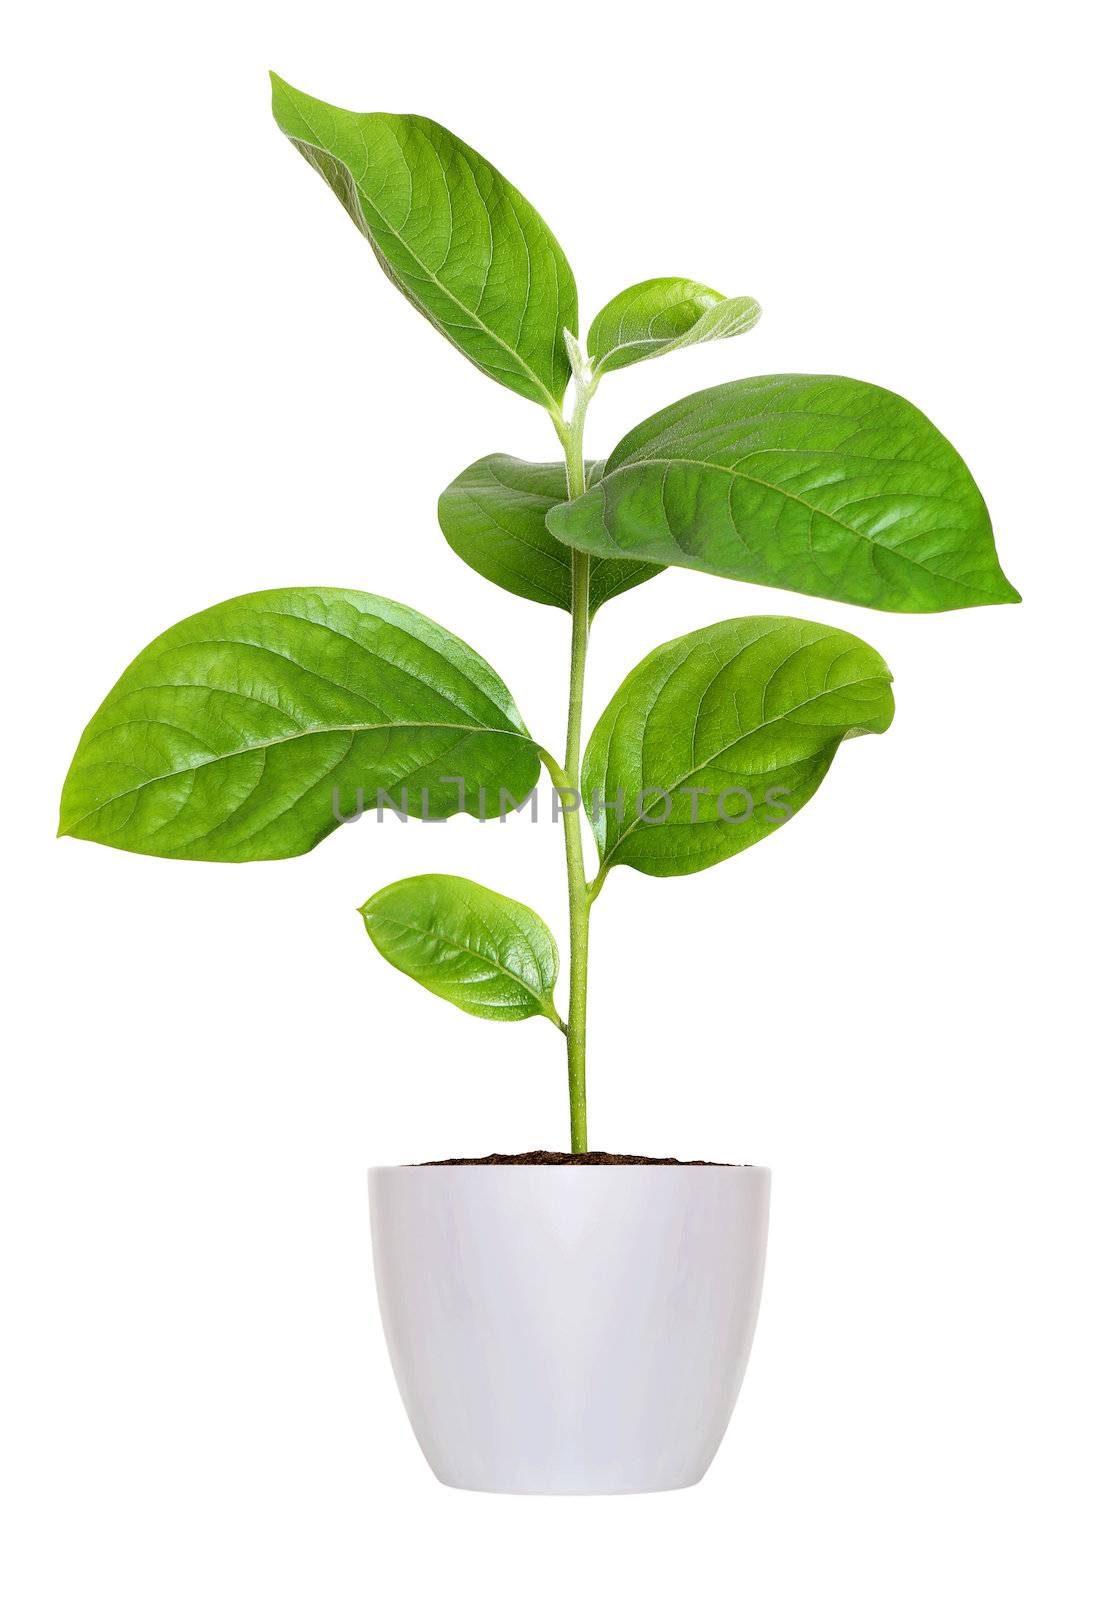 small green seedling in a flowerpot isolated